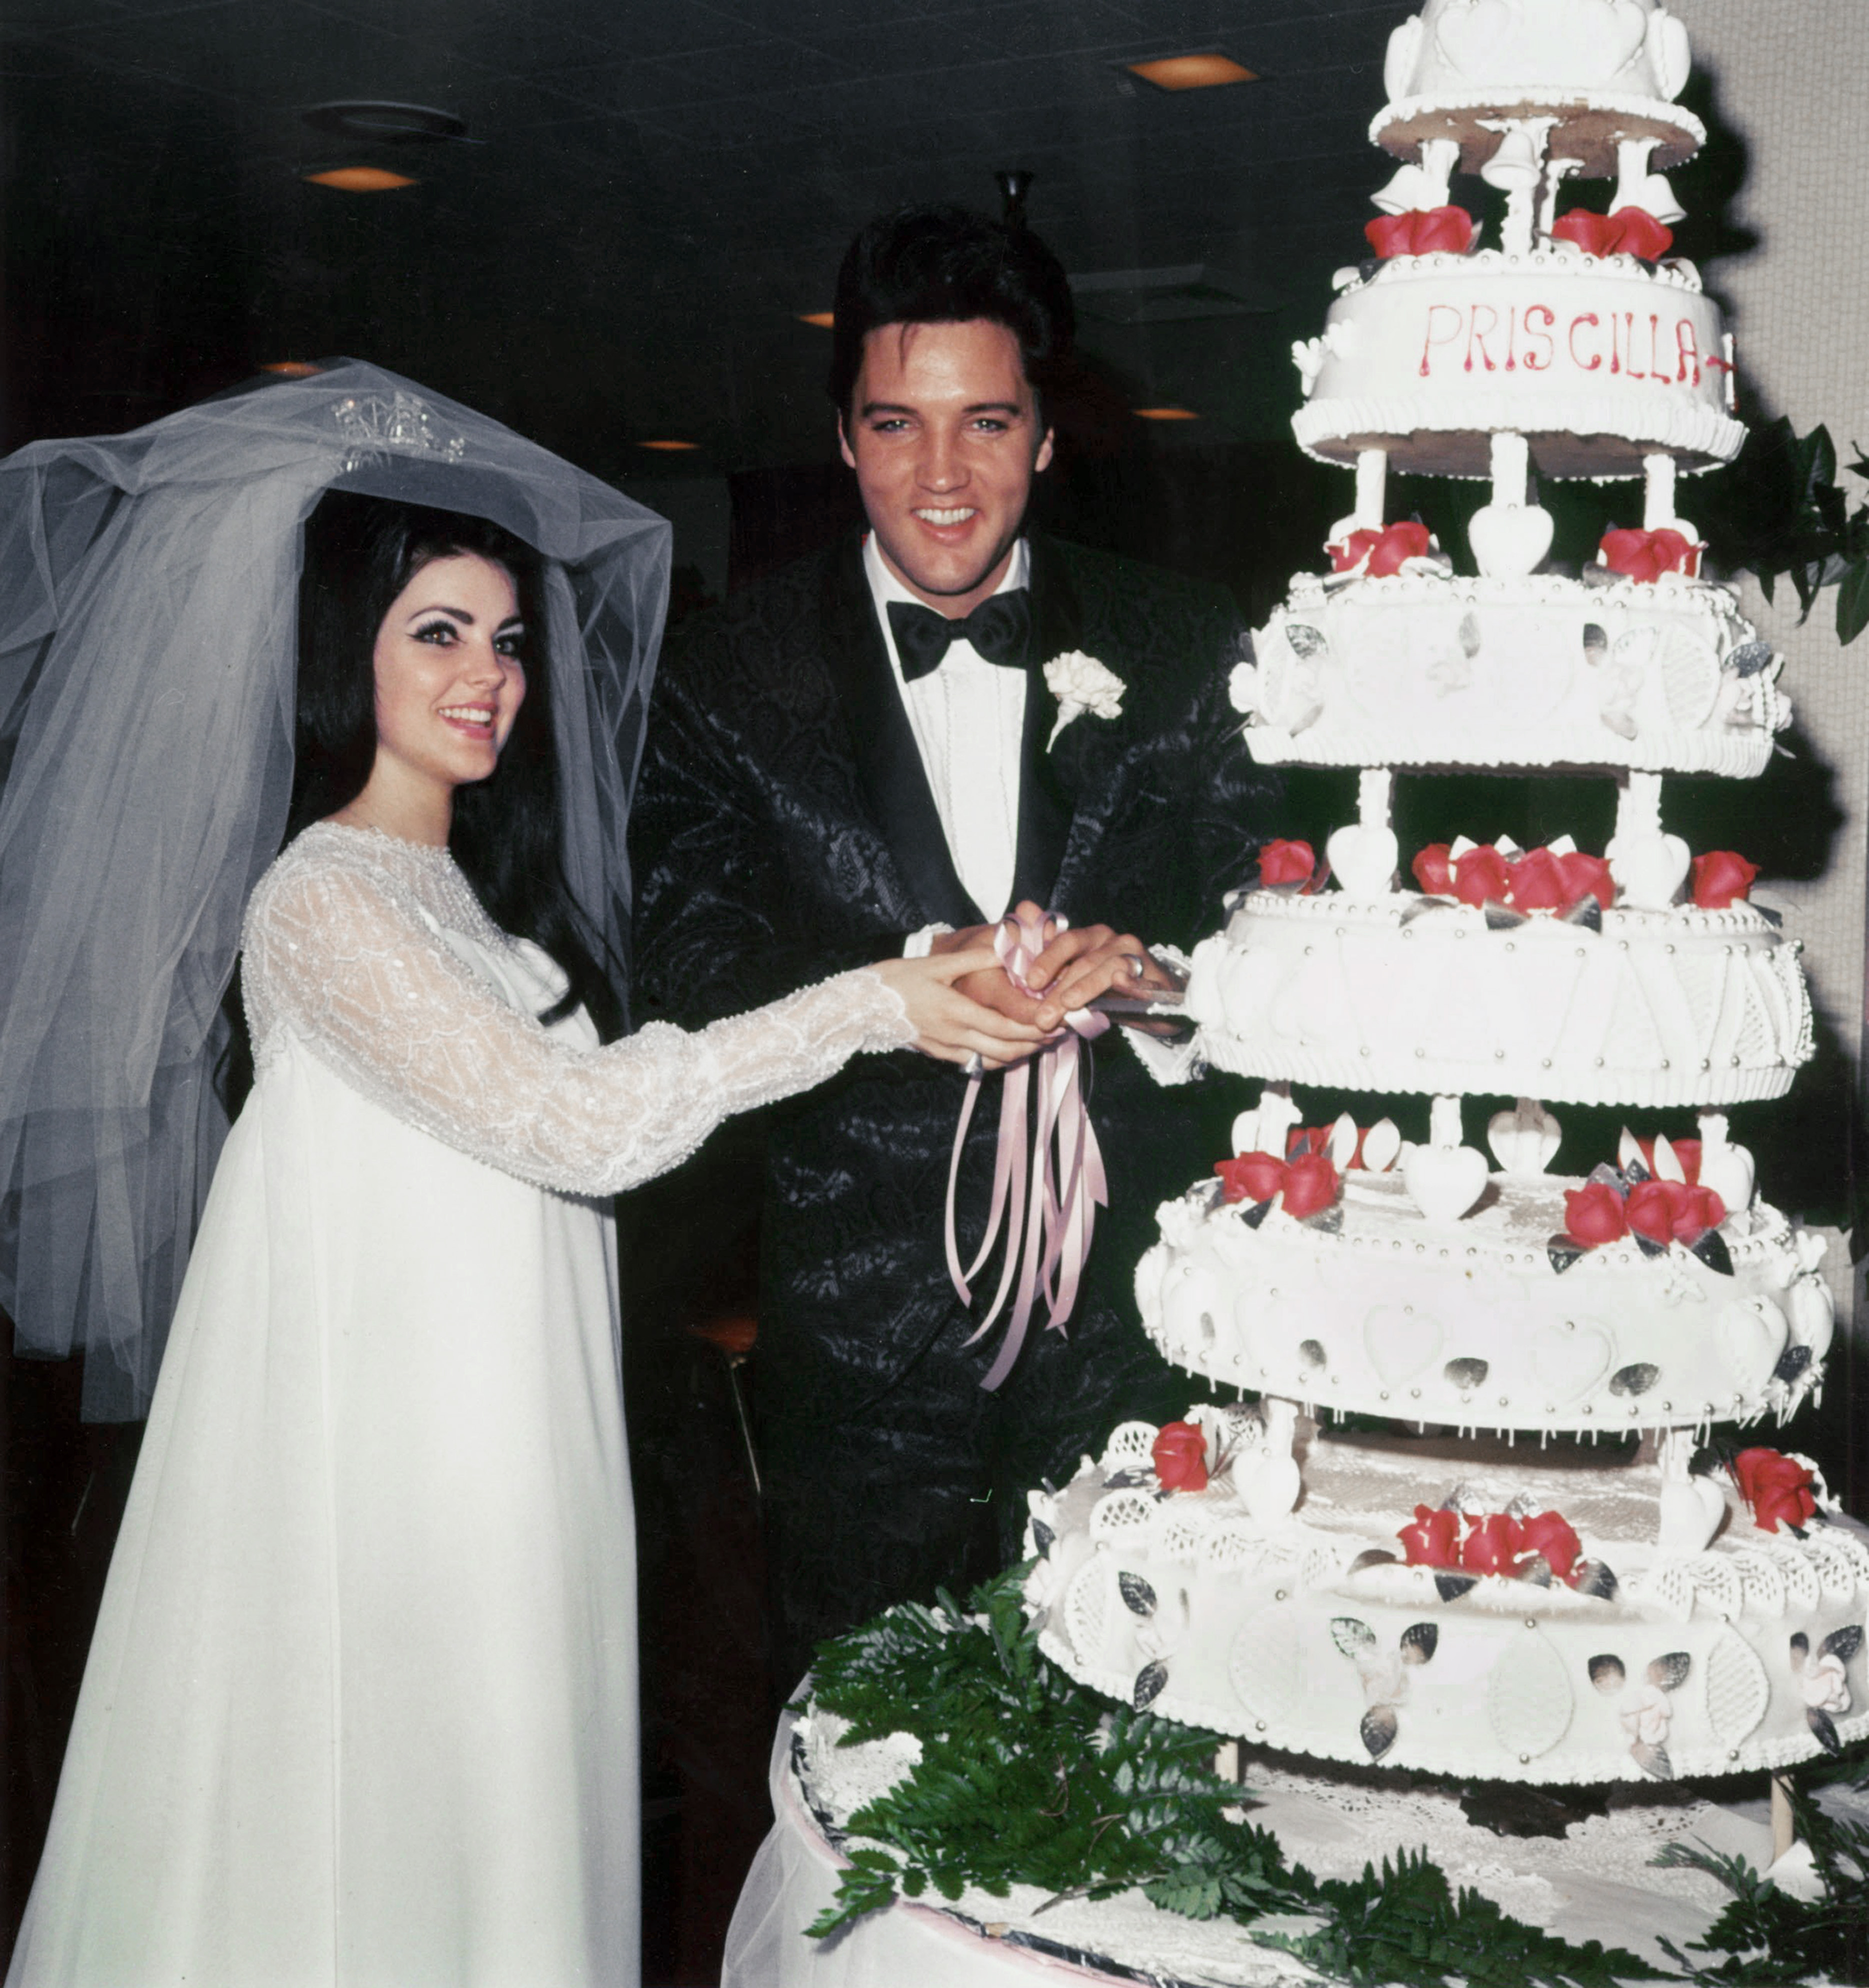 Priscilla Presley and Elvis Presley on their wedding day on May 01, 1967 | Source: Getty Images